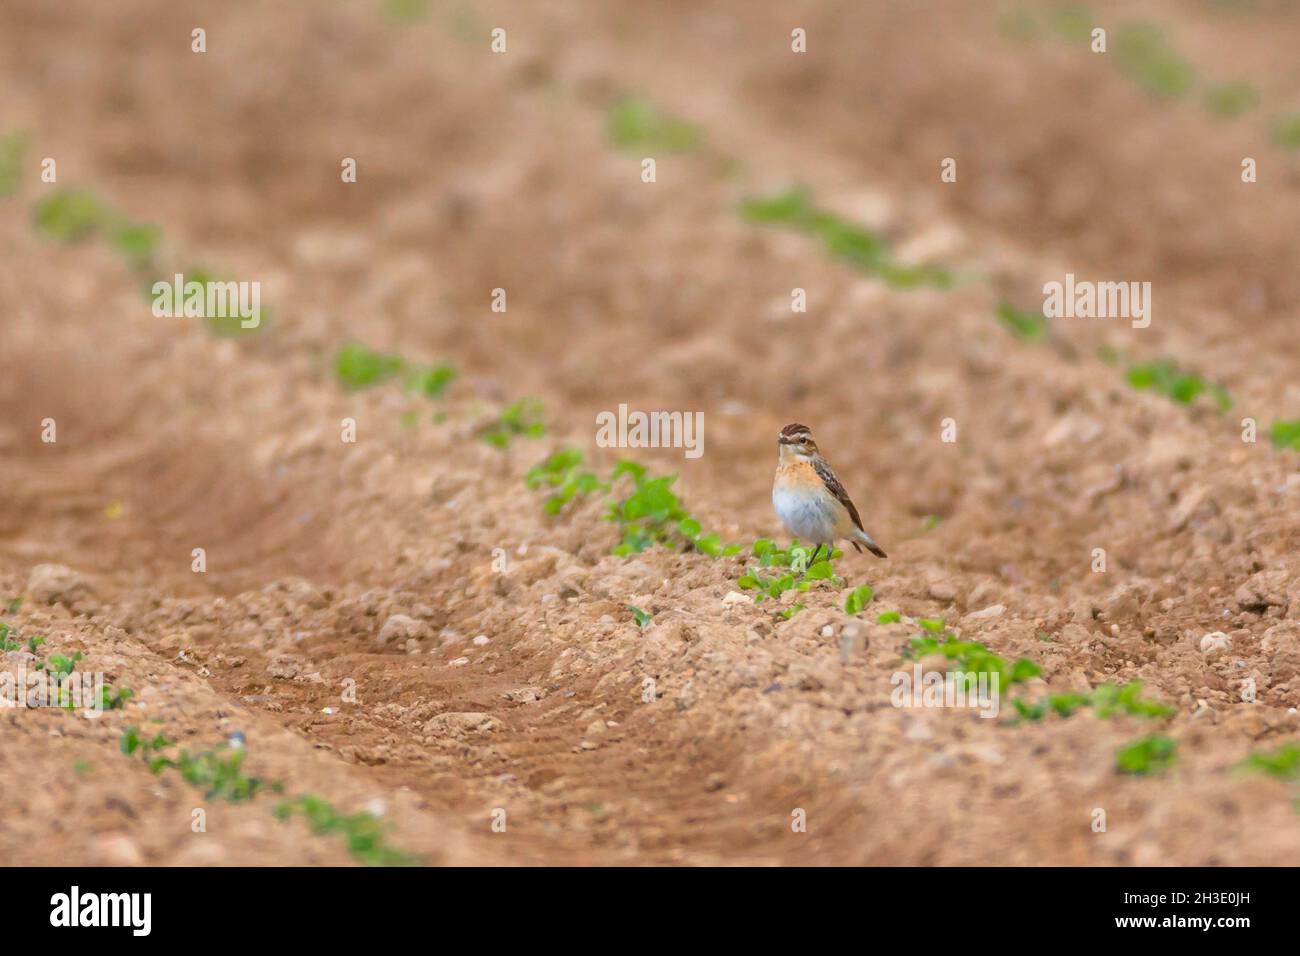 whinchat (Saxicola rubetra), perched on a furrow in a field, Germany Stock Photo